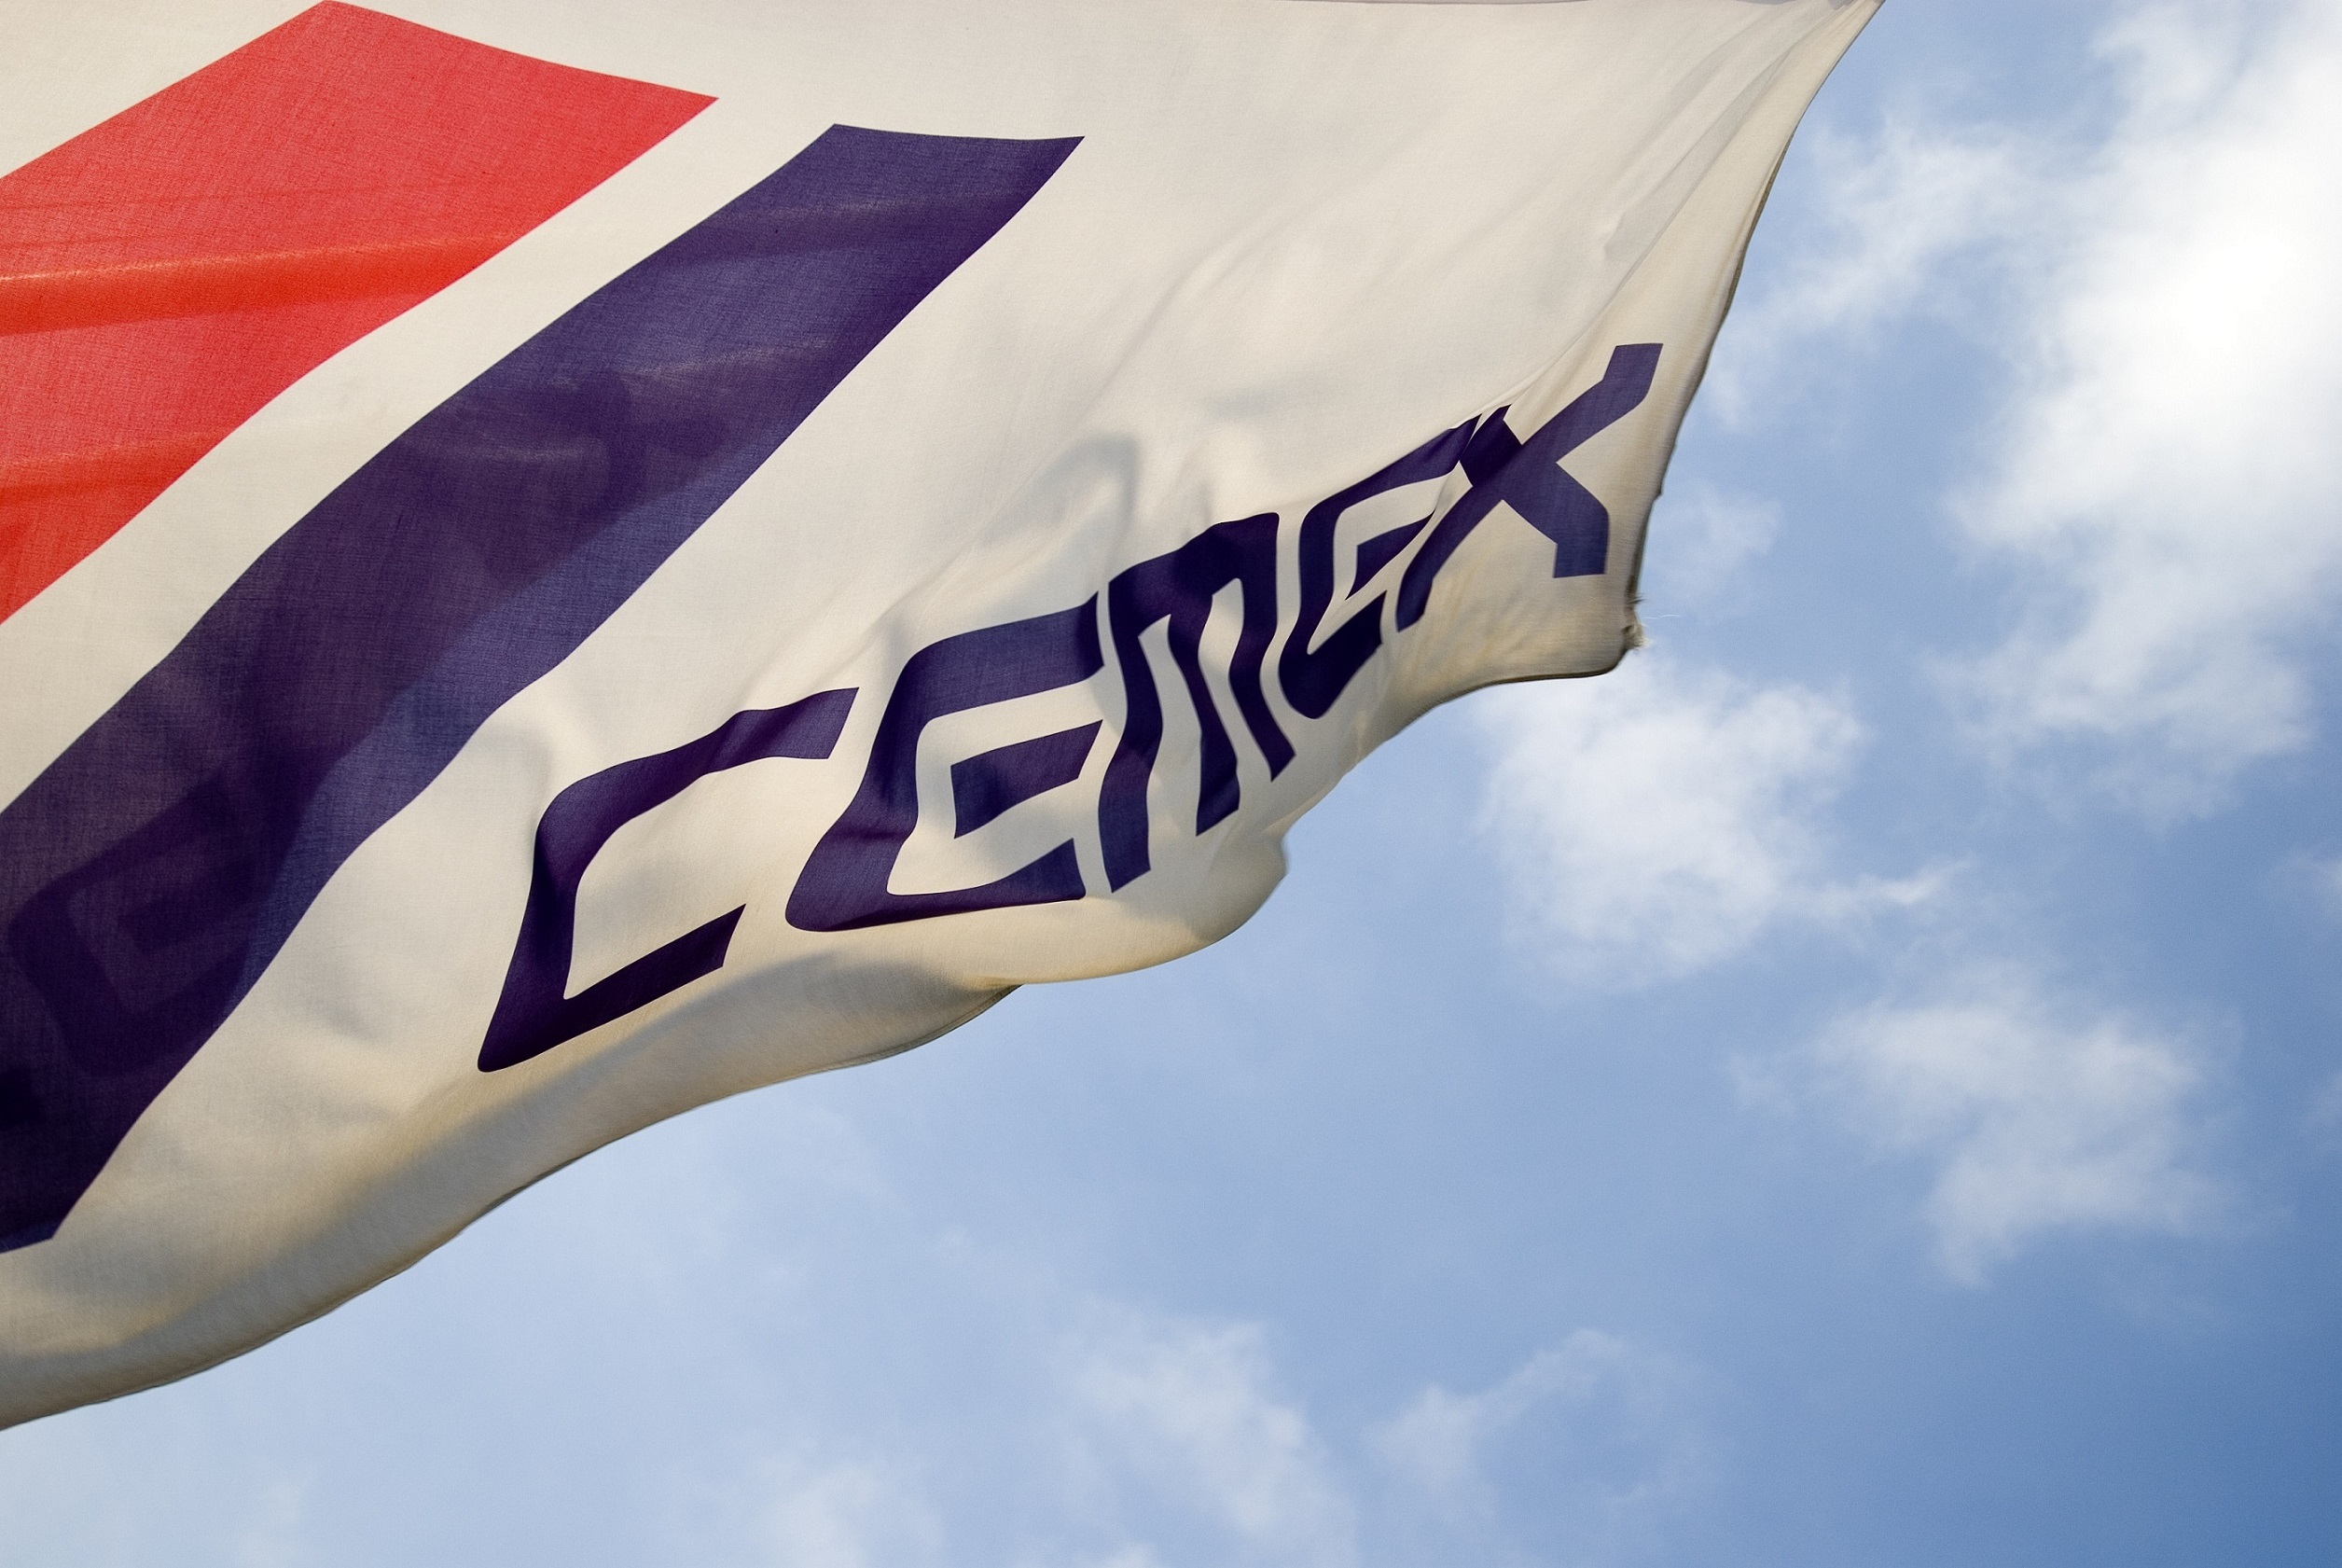 CEMEX's Q1 net sales increased by 13% to US$3,770m